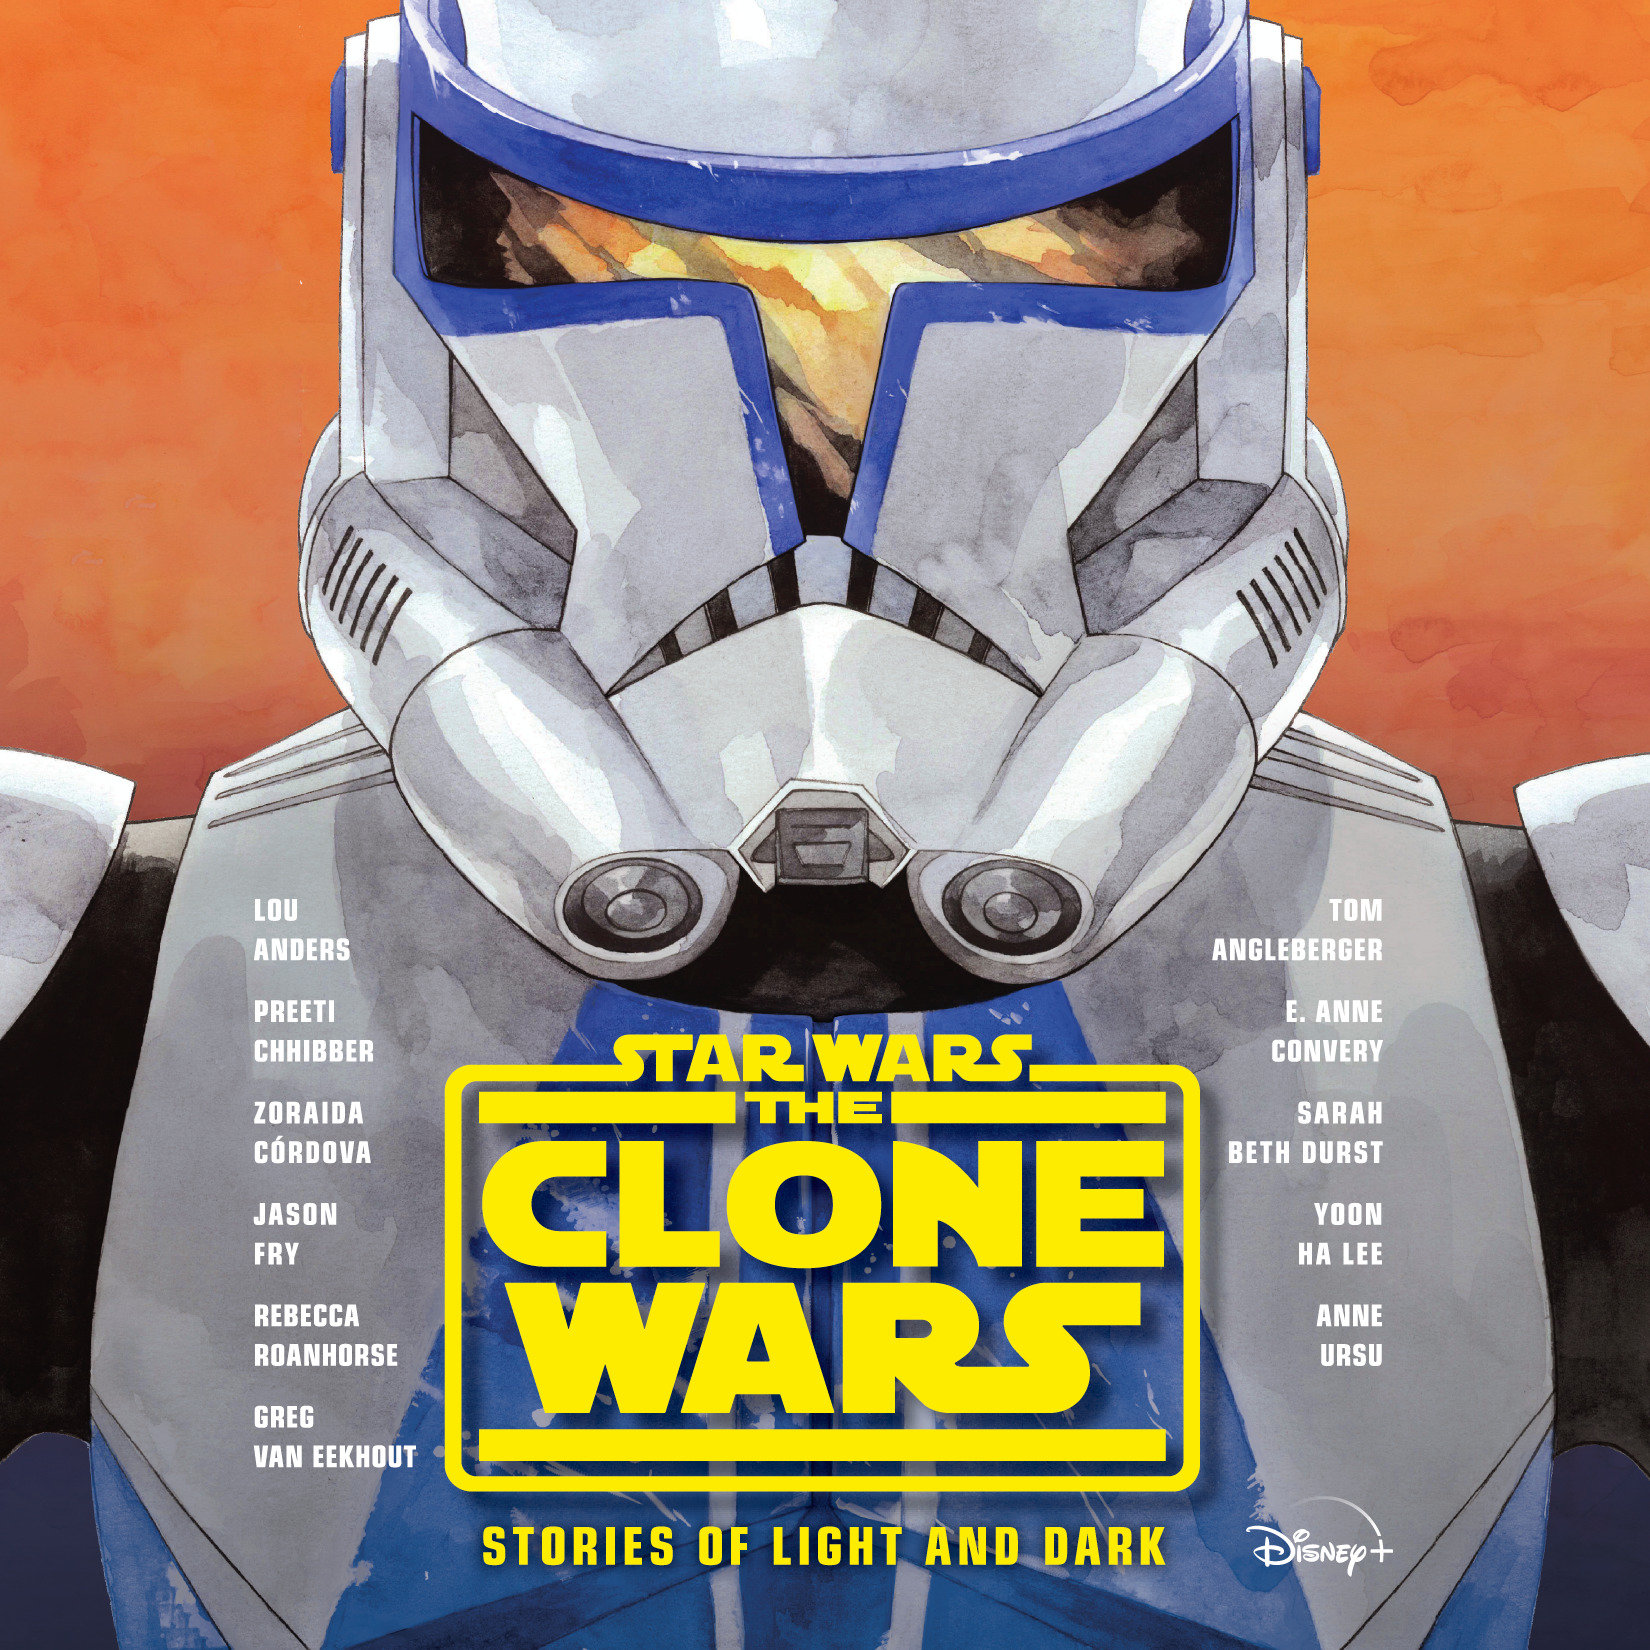 The Clone Wars: Stories of Light and Dark (25.08.2020)